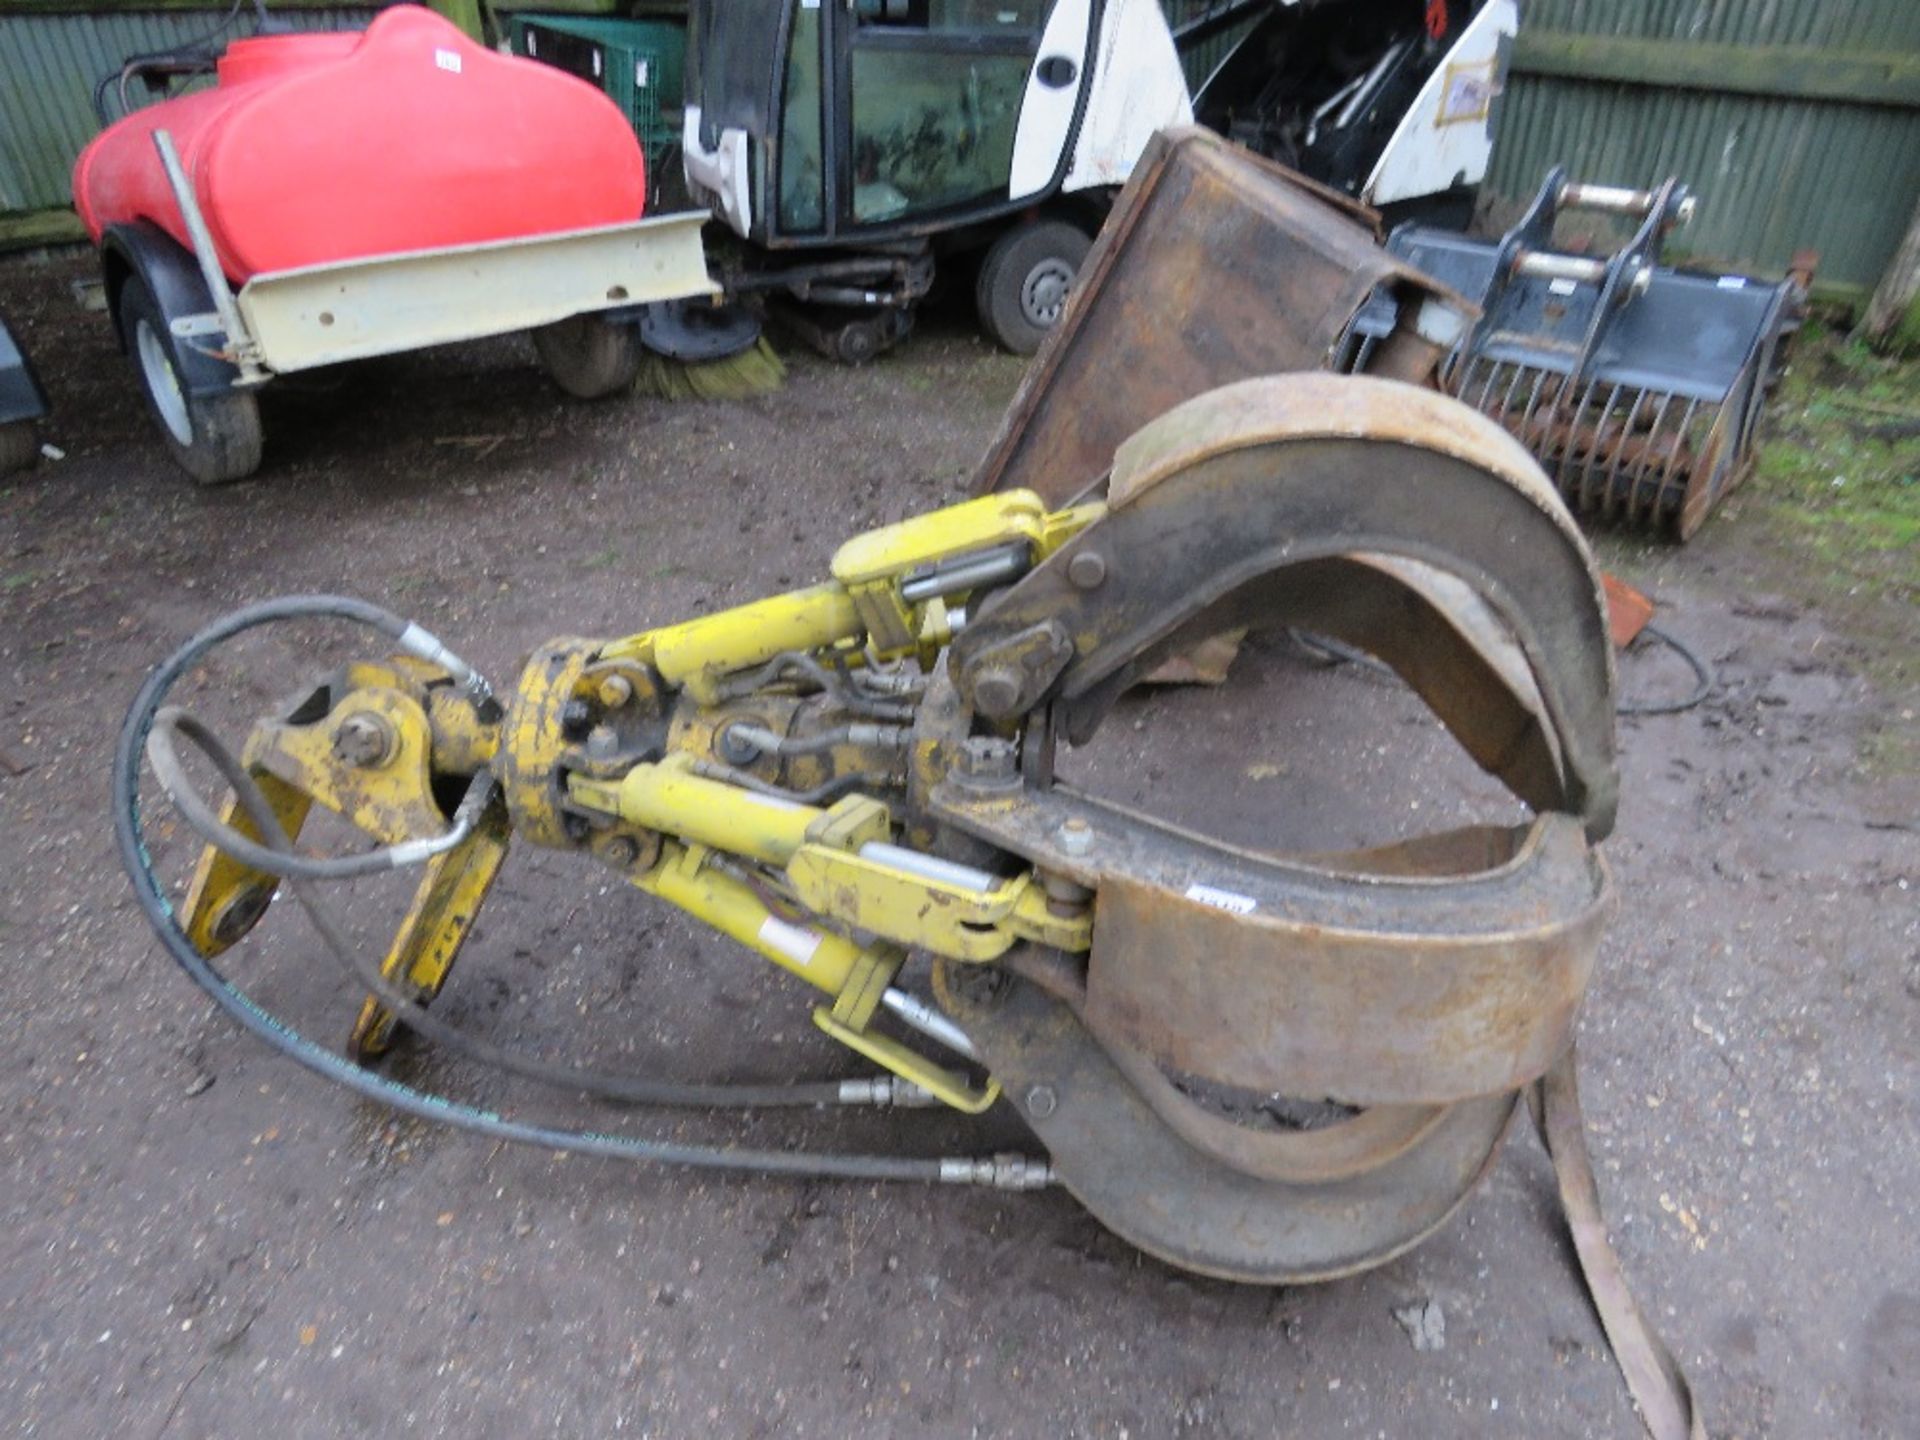 EXCAVATOR MOUNTED 5 TINE SCRAP GRAB WITH ROTATOR ON 65MM PINS, RAMS DONE LITTLE WORK SINCE REFURBISH